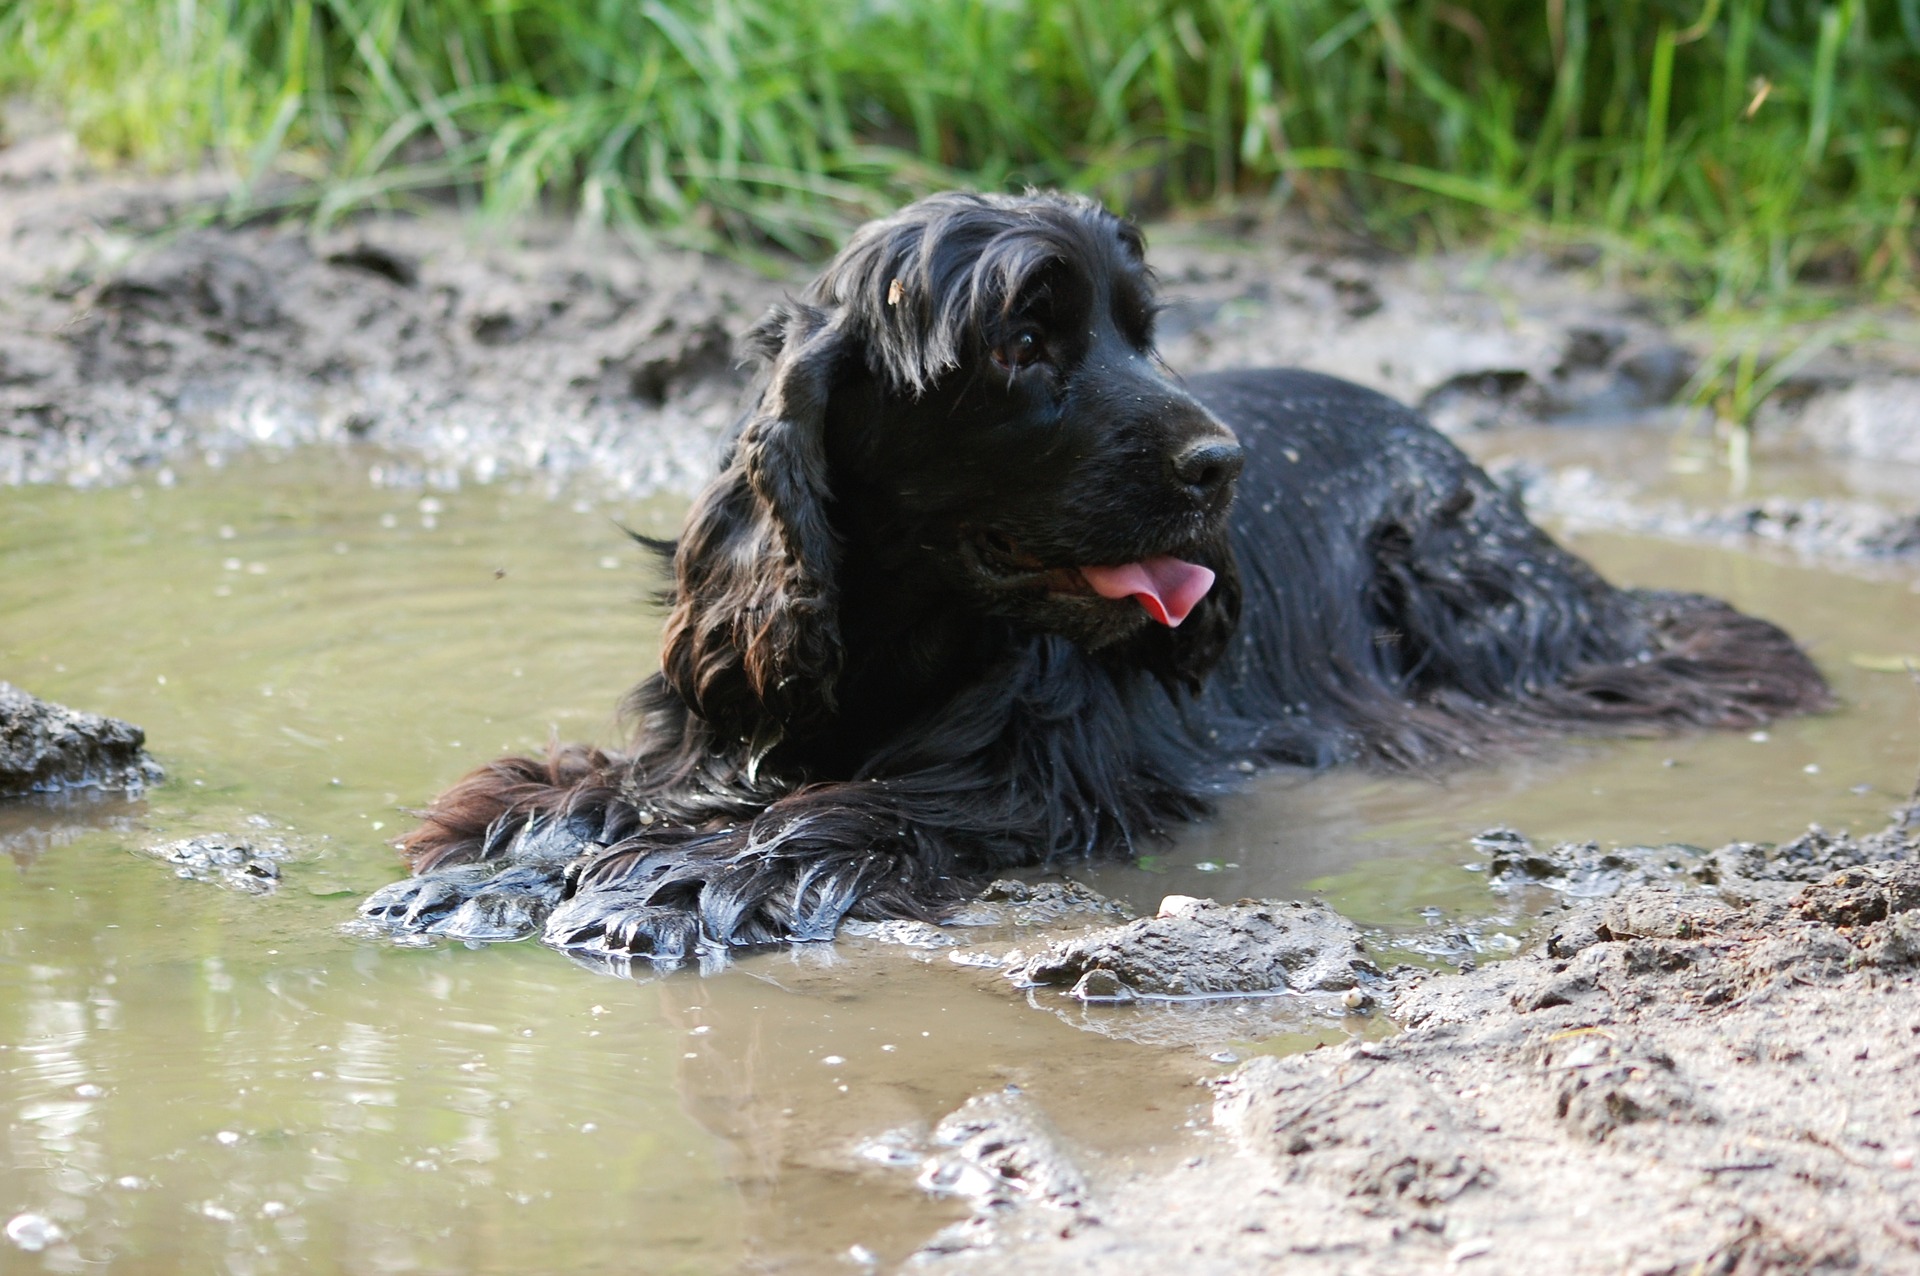 Photo of dog laying in muddy water, where it may encounter giardia